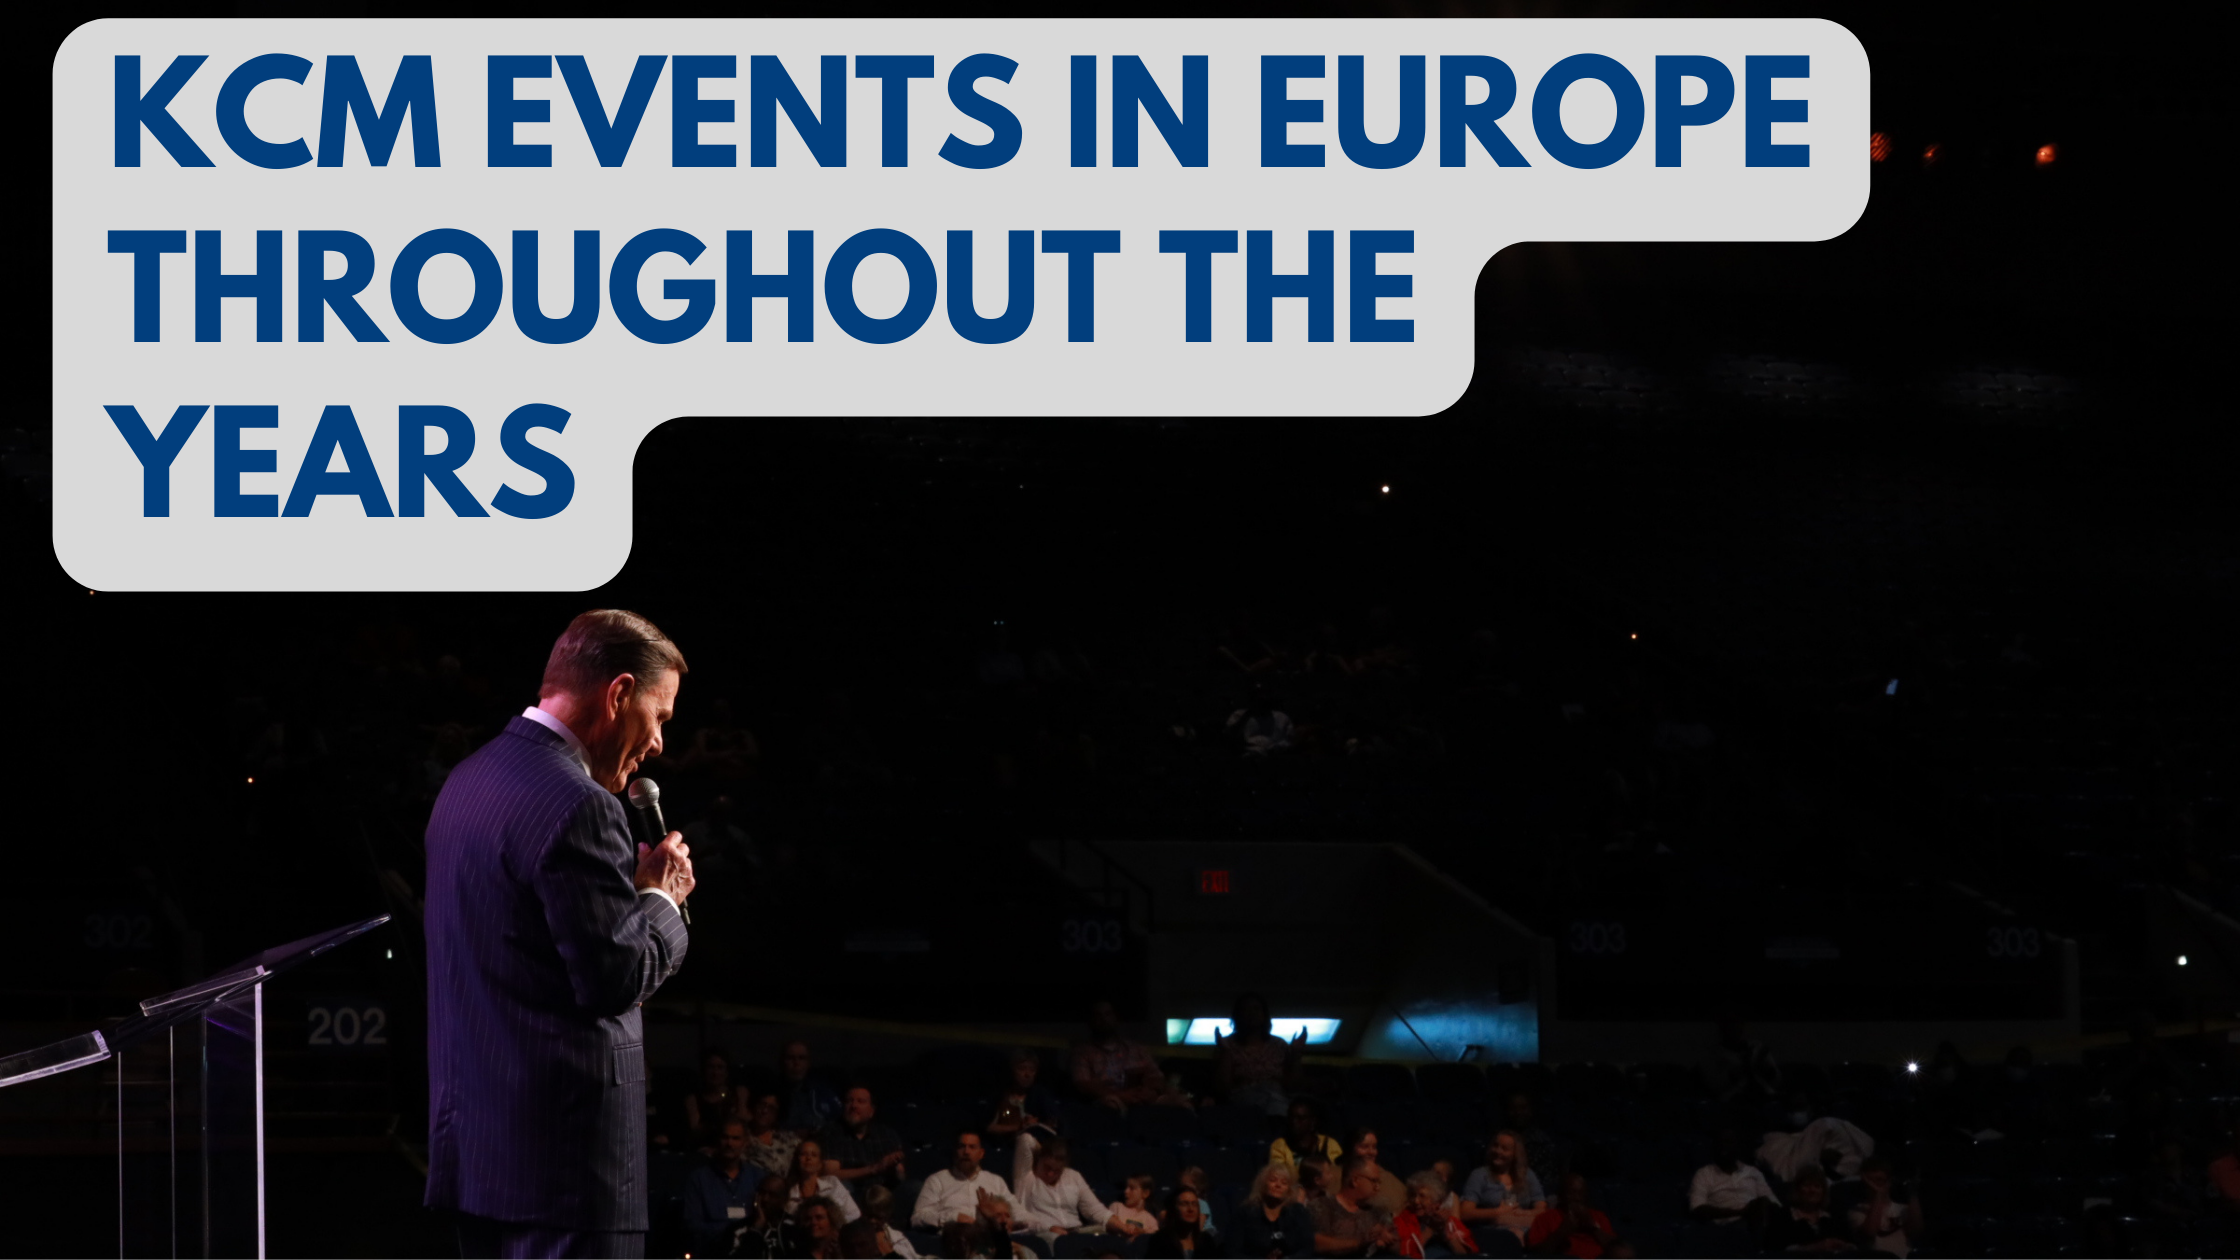 KCM Events in Europe thoughtout the years